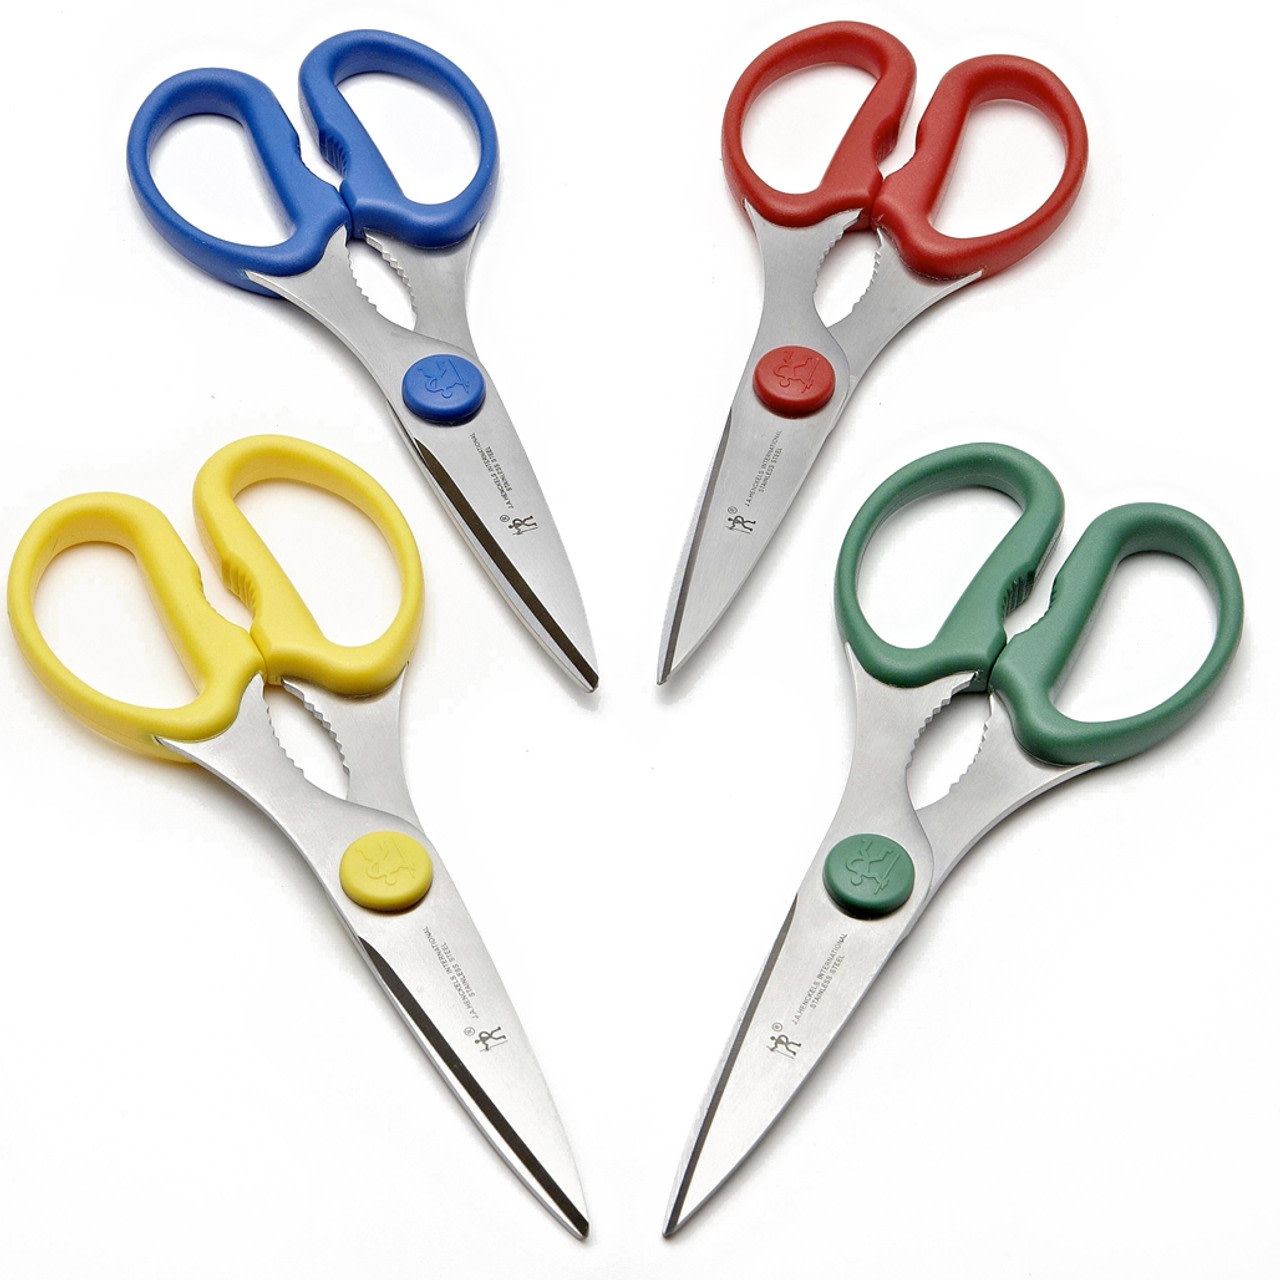 Zwilling J.A. Henckels Kitchen Shears Assorted Color (1 Pair Per Order) - 41356-004